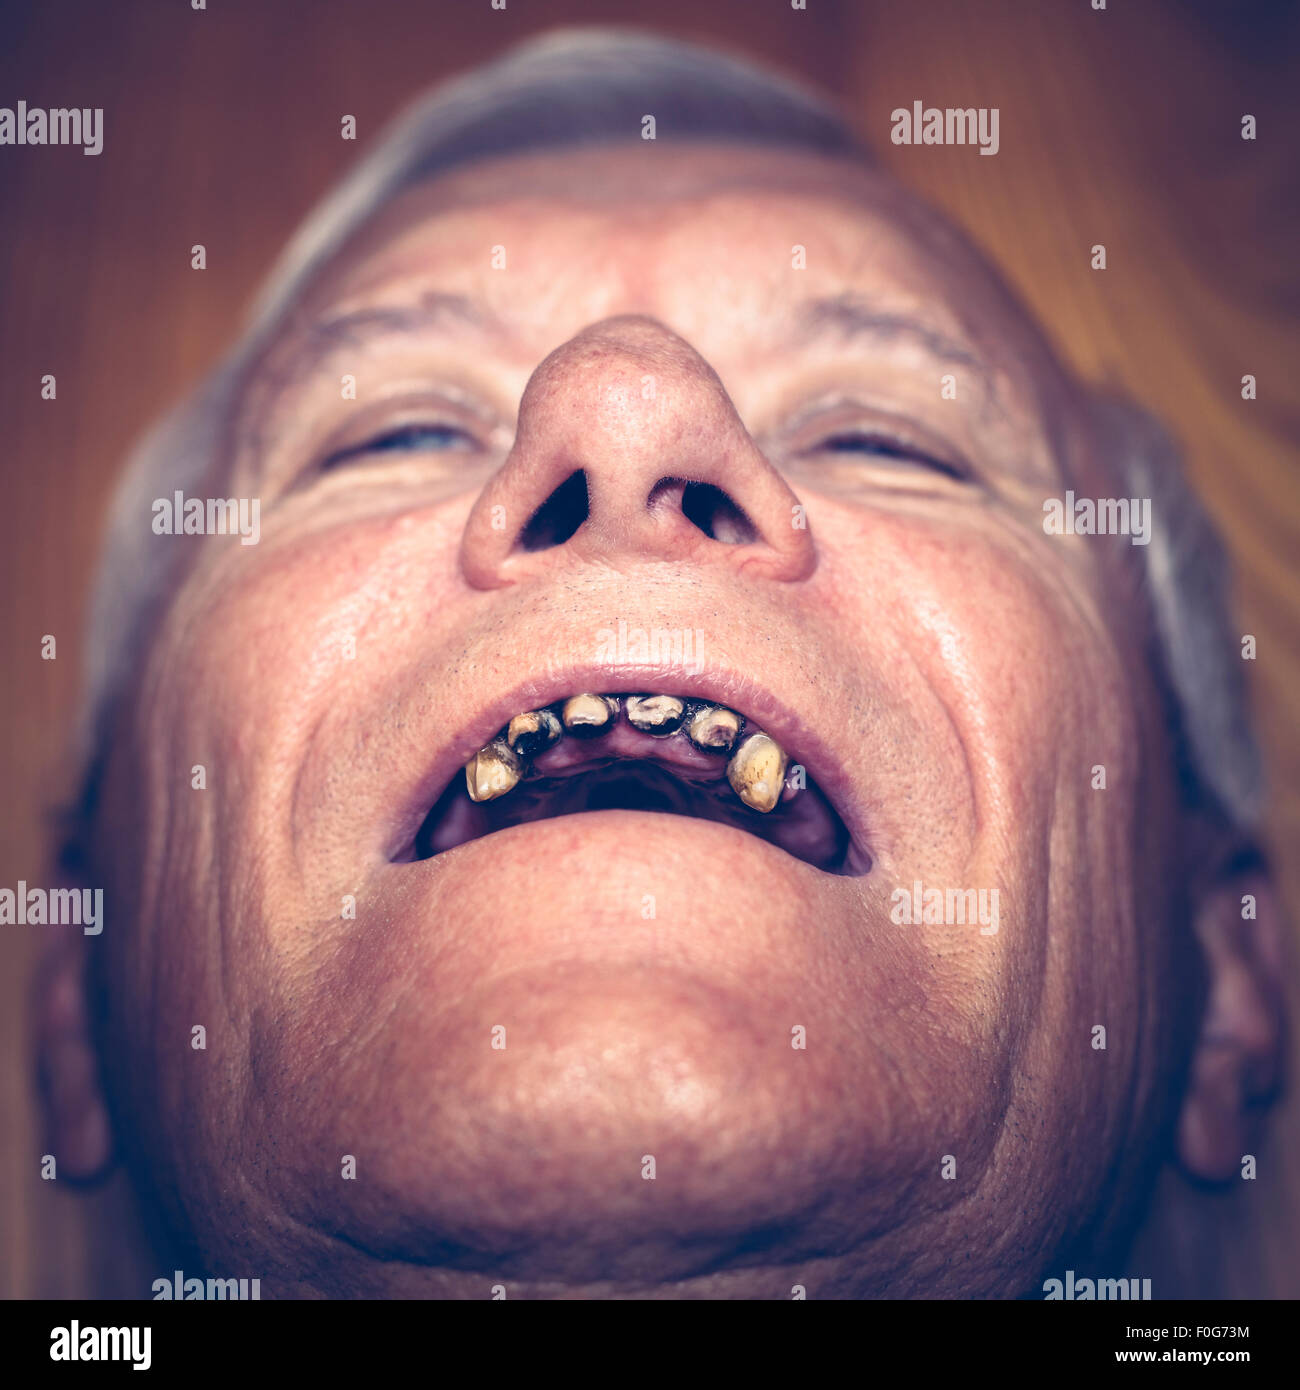 Closeup of an old man face with ugly teeth. Stock Photo